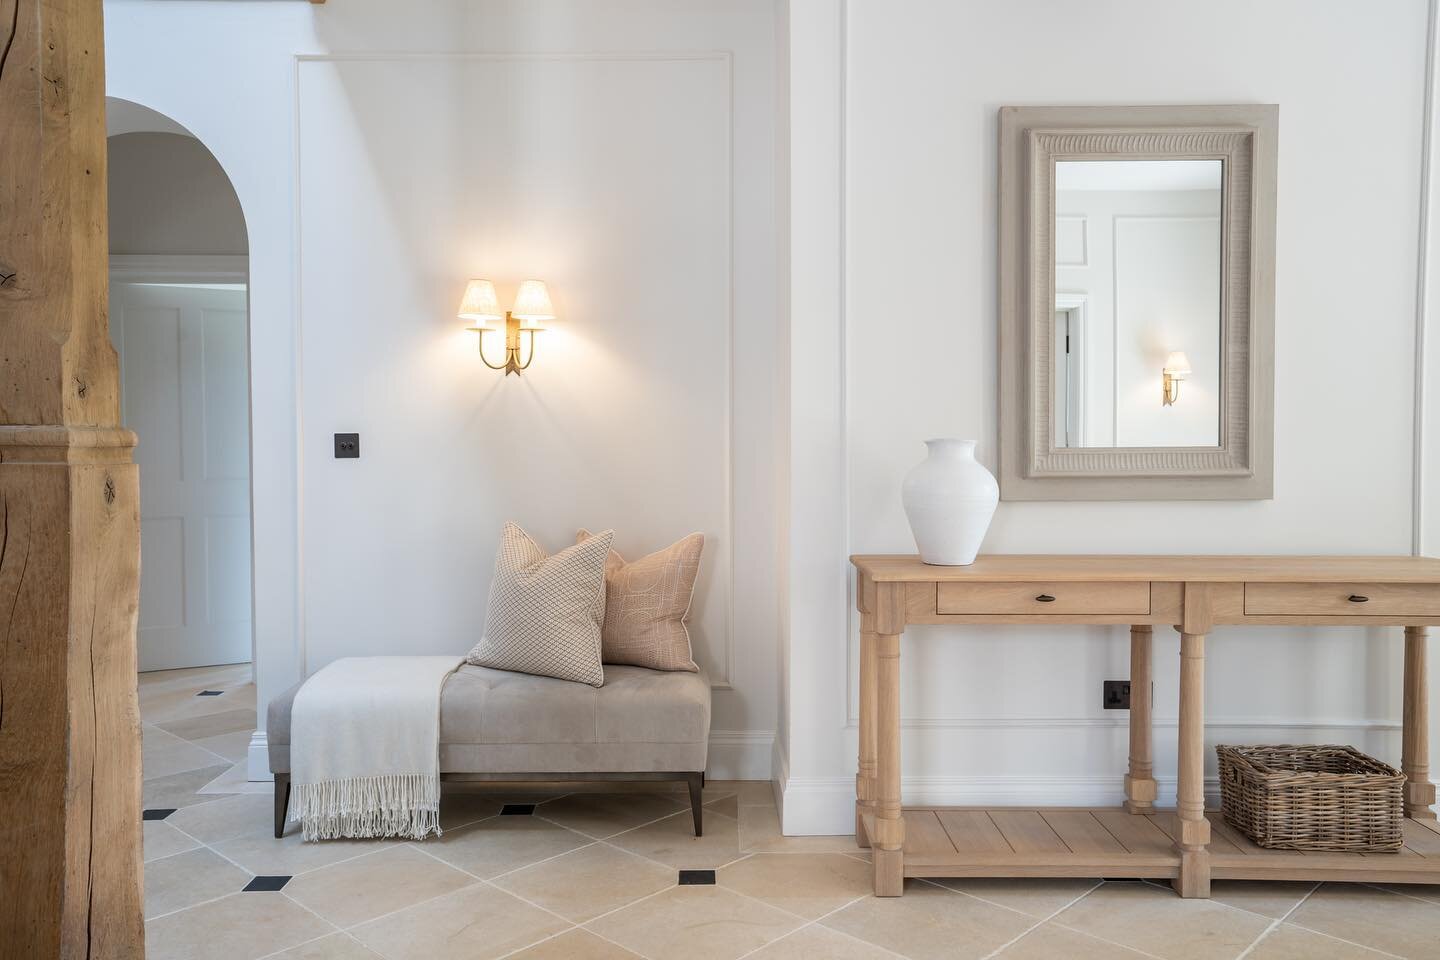 A favourite elevation from the hallway at our Suffolk country manor project #suffolkpropertydevelopment 
.
Finishing up the year - Happy Christmas 💫
. 
.
📸  @visual_peakuk 
.
#interiors #interiorarchitecture #propertyrenovation #suffolkhomes #suffo